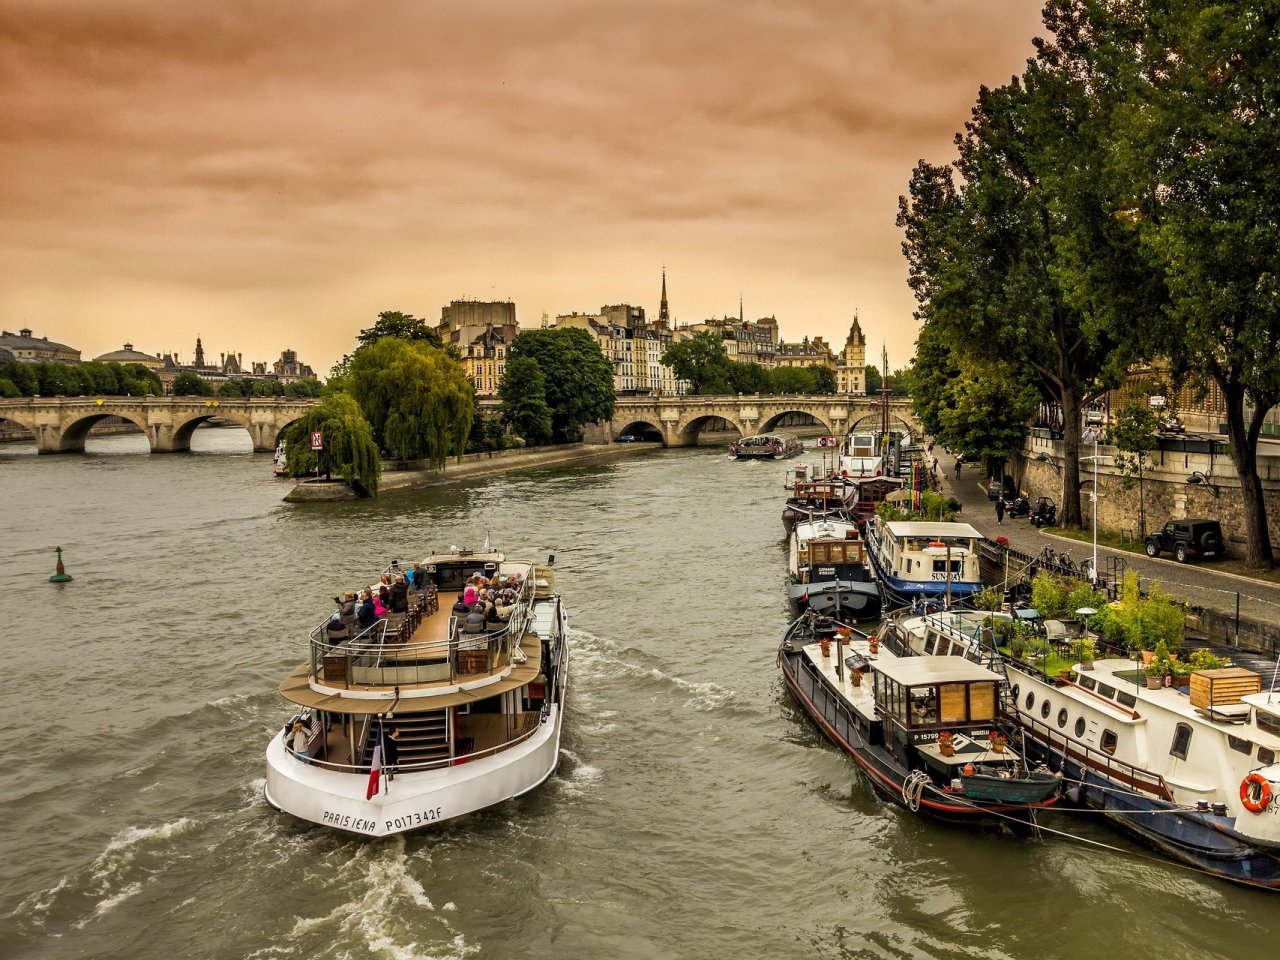 The Seine River jigsaw puzzle